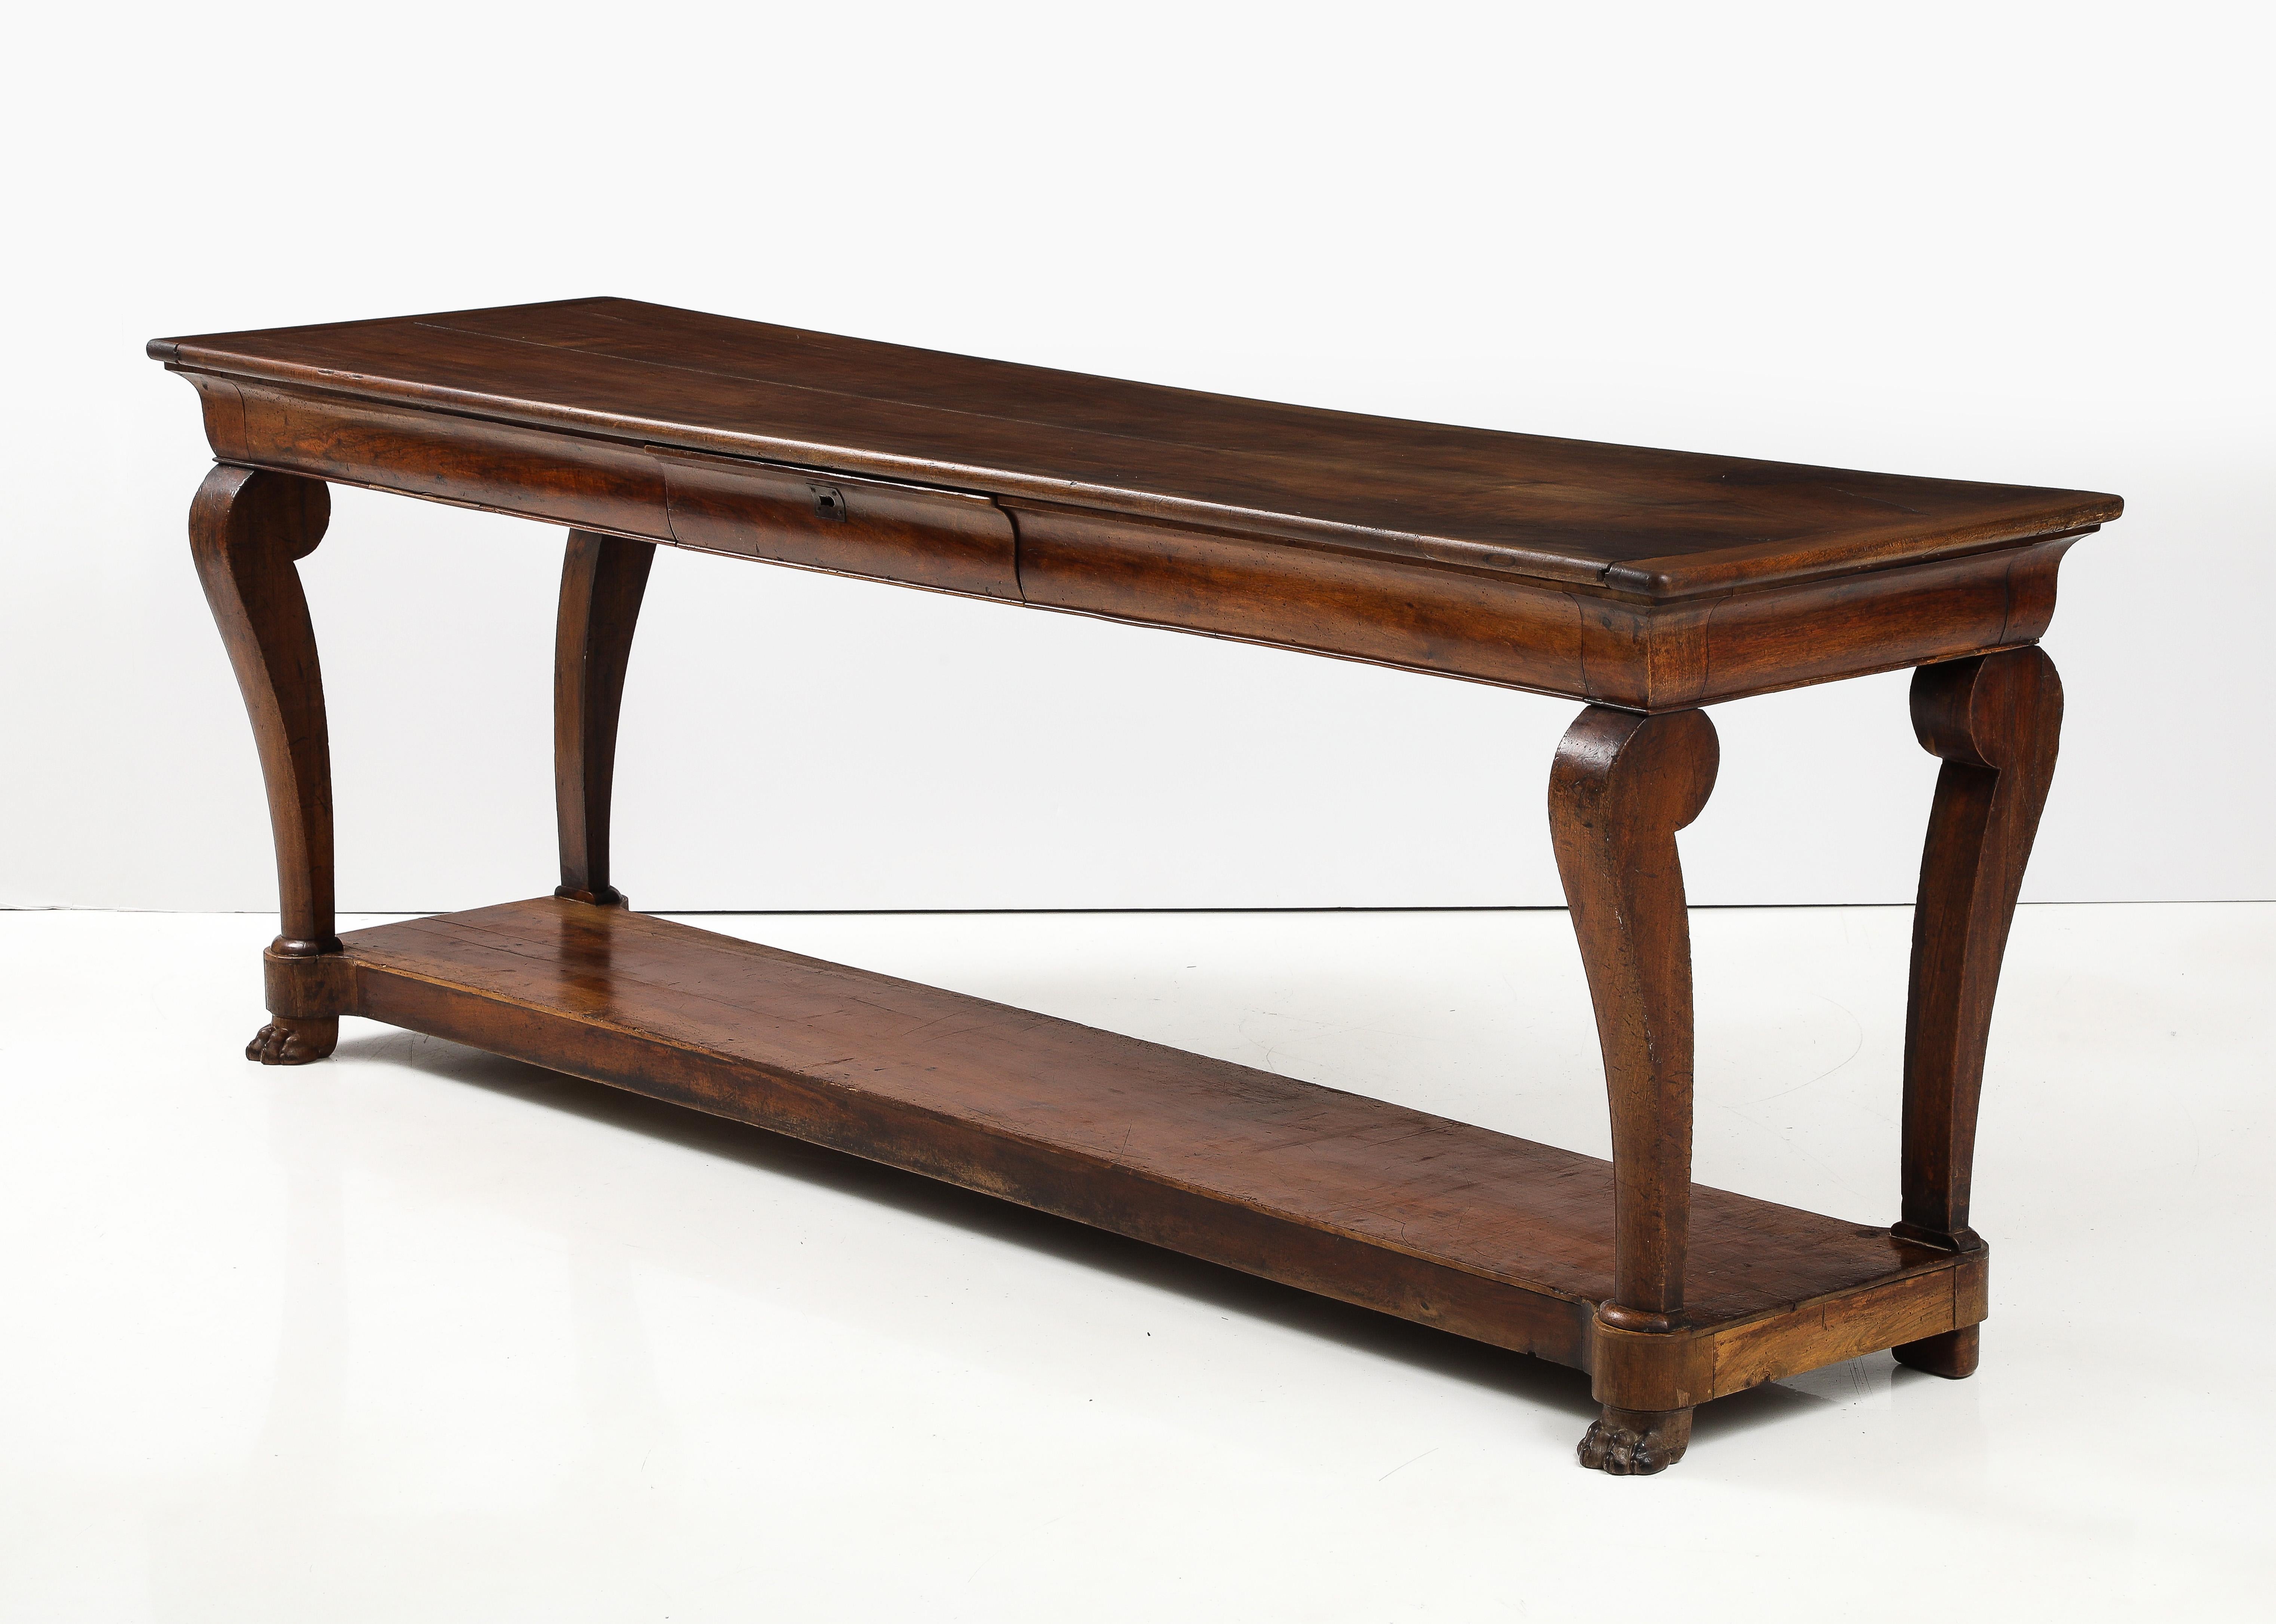 Mid-19th Century 19th C. French Walnut Console with Drawer, Lower Shelf & Lion Claw Feet For Sale